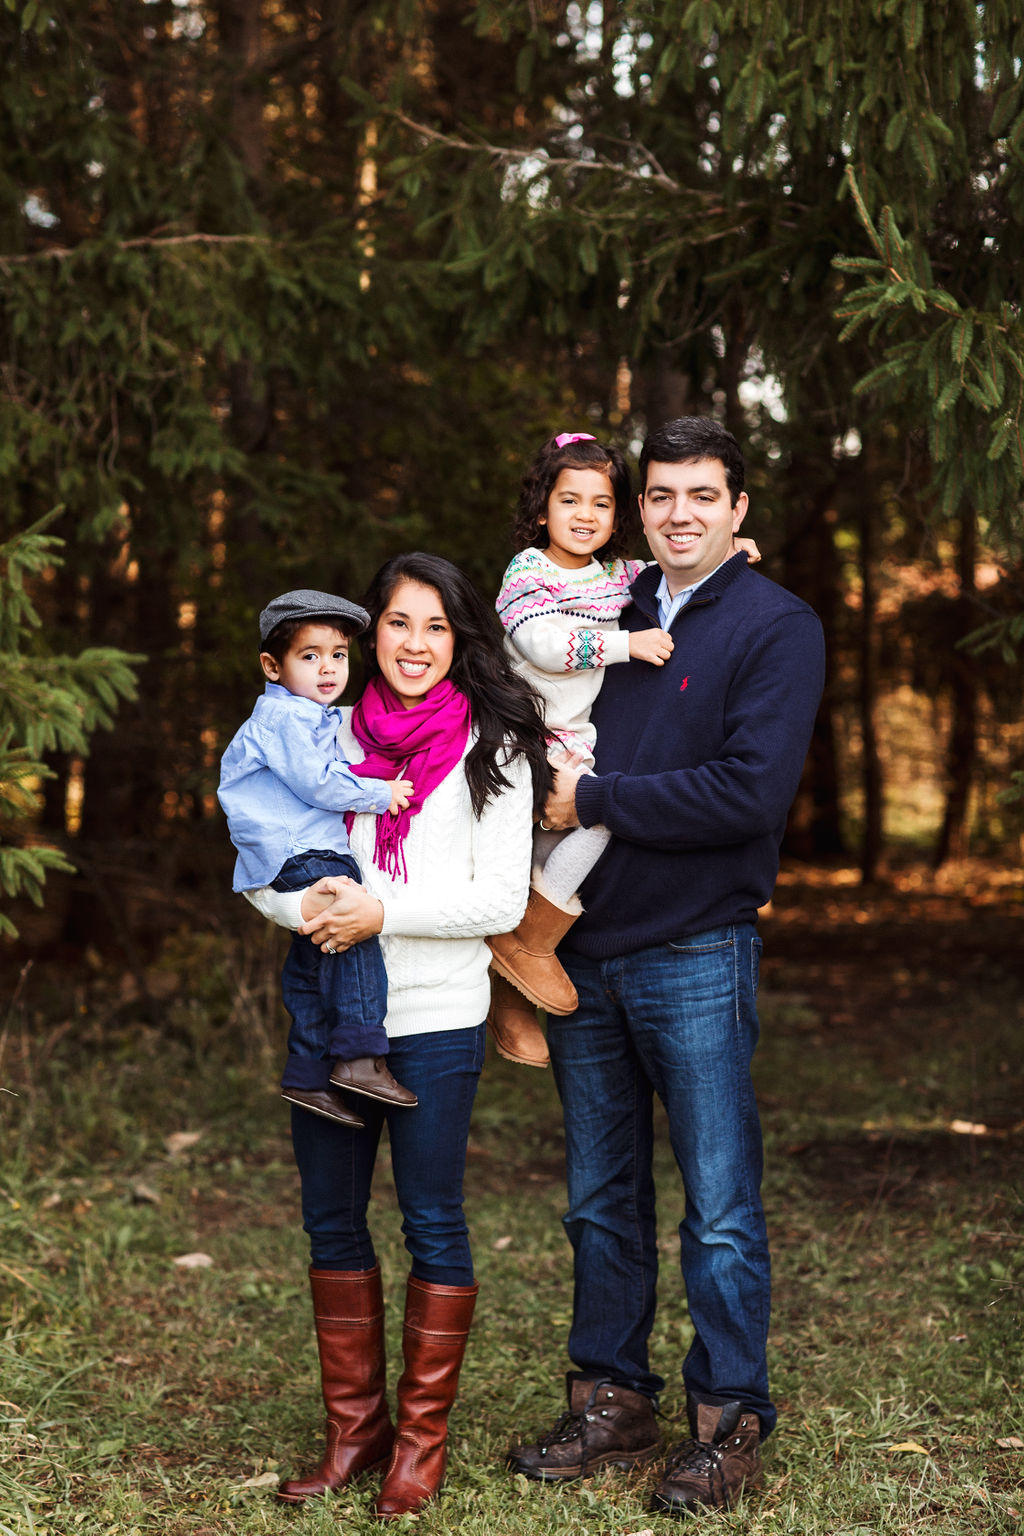 Jenny-Berliner-Photography-Family-Photo Session - Upstate New York Photographer | Rochester Family Photographer